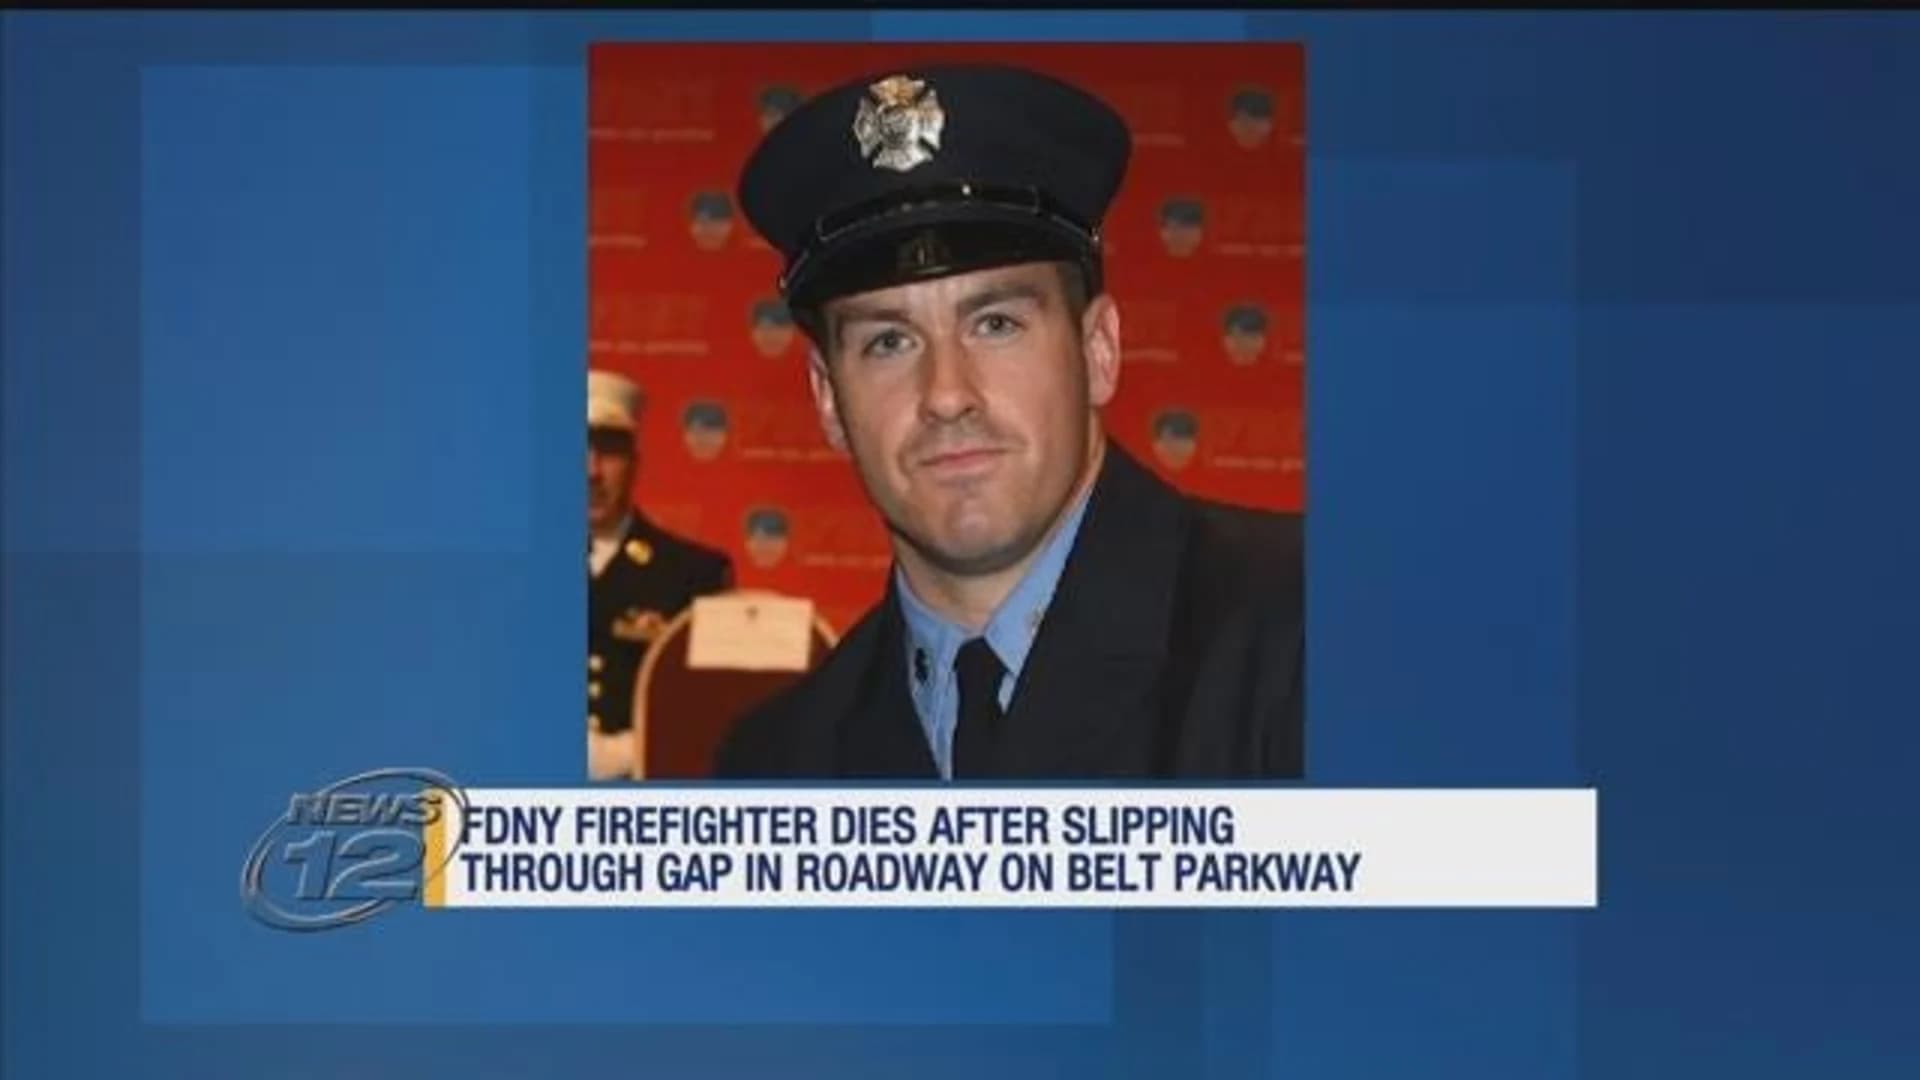 Officials: FDNY firefighter dies after slipping through gap on Belt Parkway